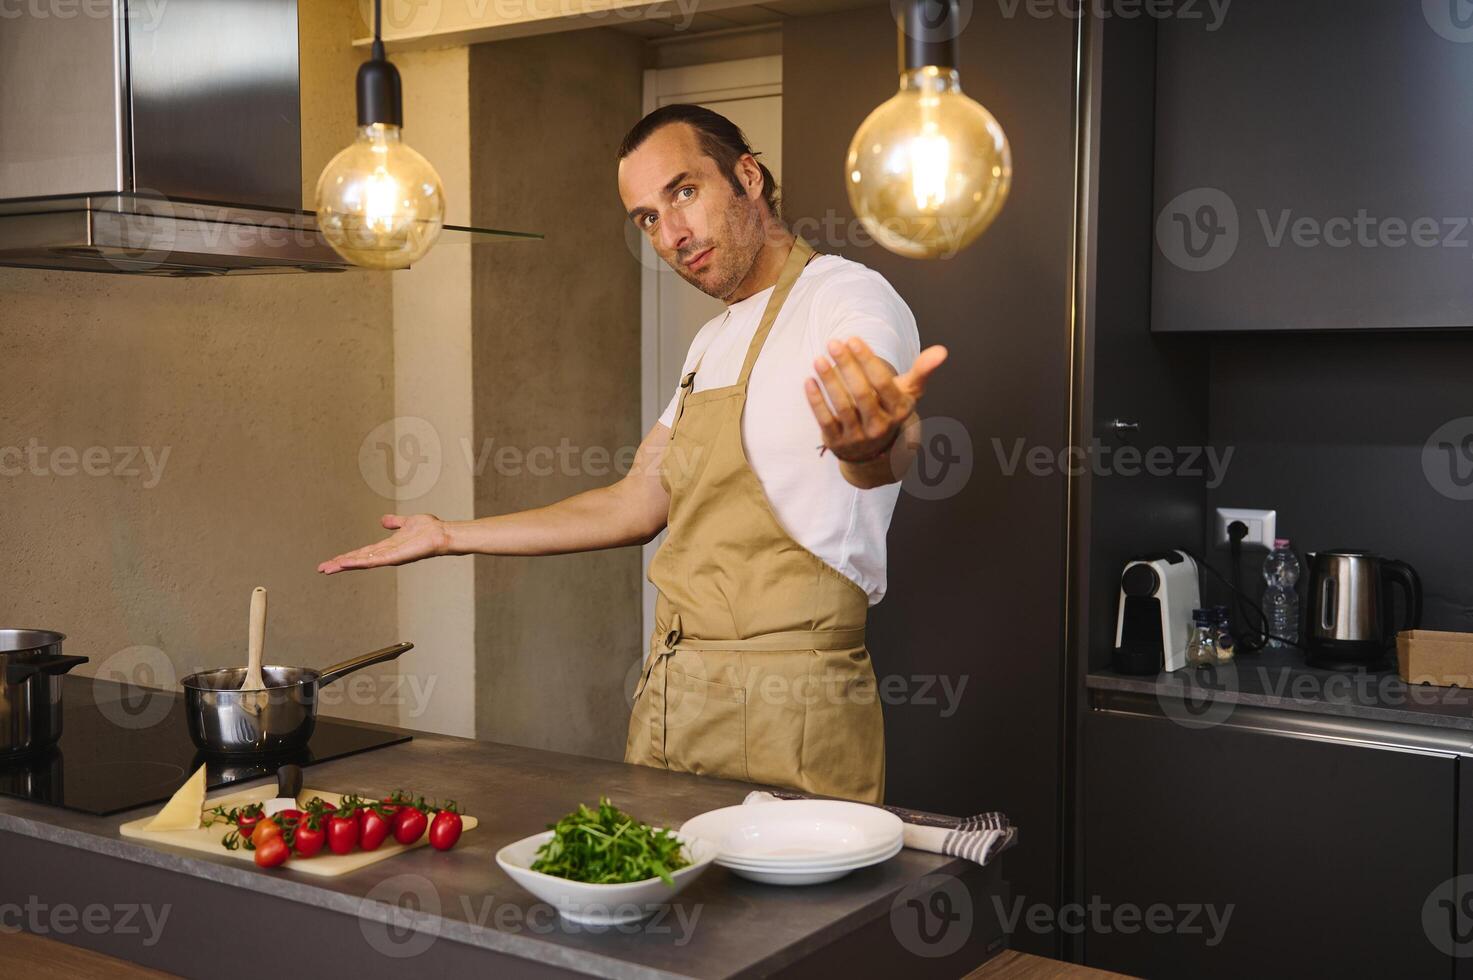 Handsome Caucasian man in chef's apron cooking family dinner, smiling and showing the kitchen counter with fresh ingredients looking at camera photo